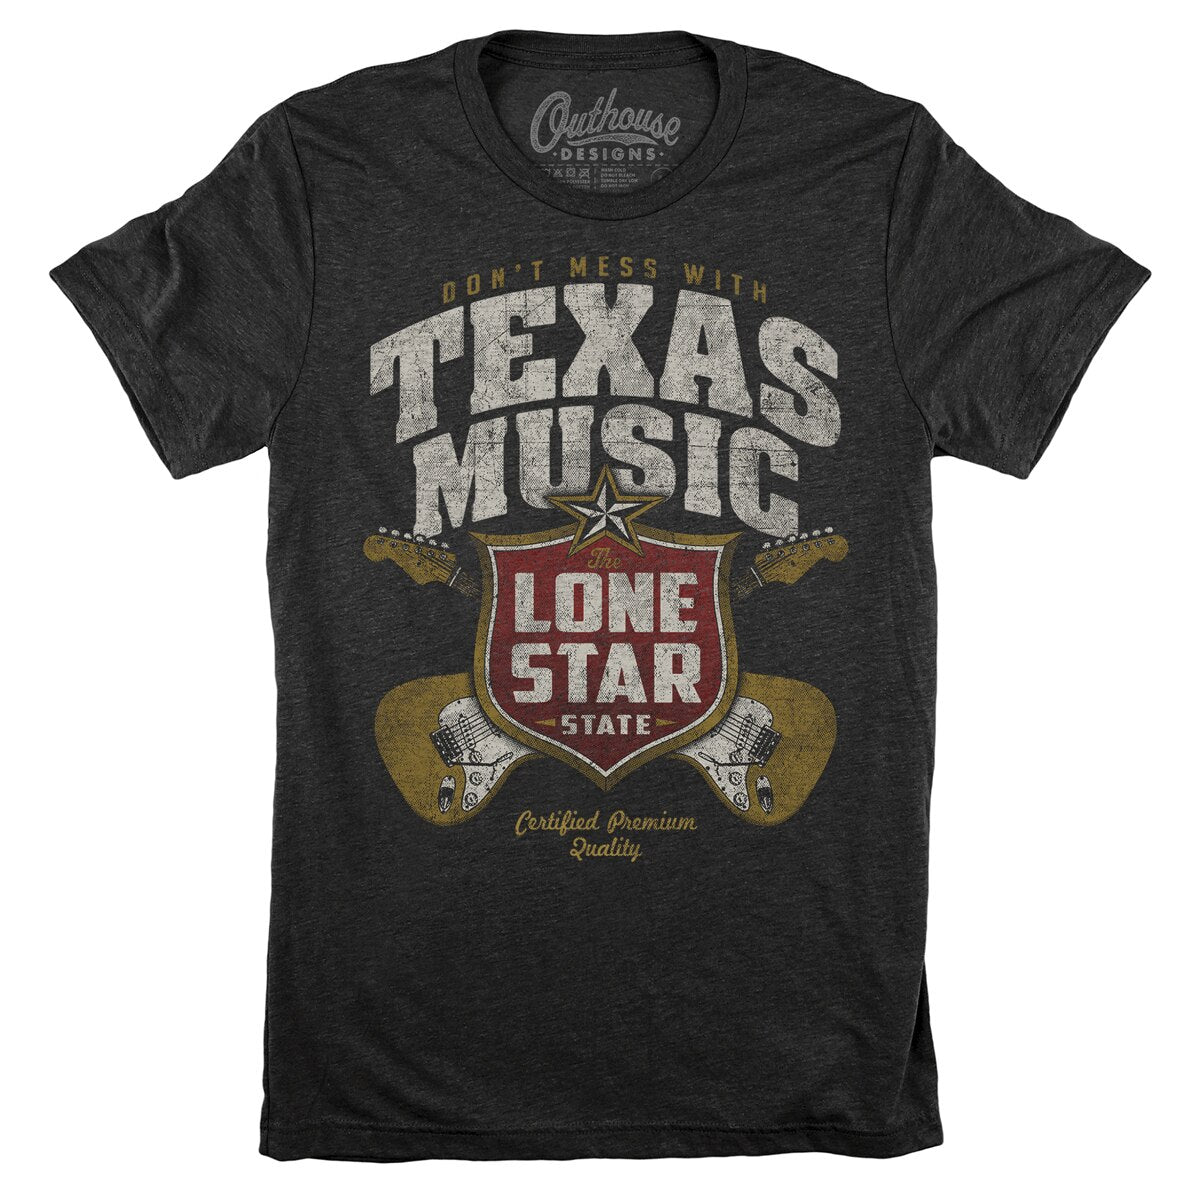 Don't Mess With Texas Music Tee